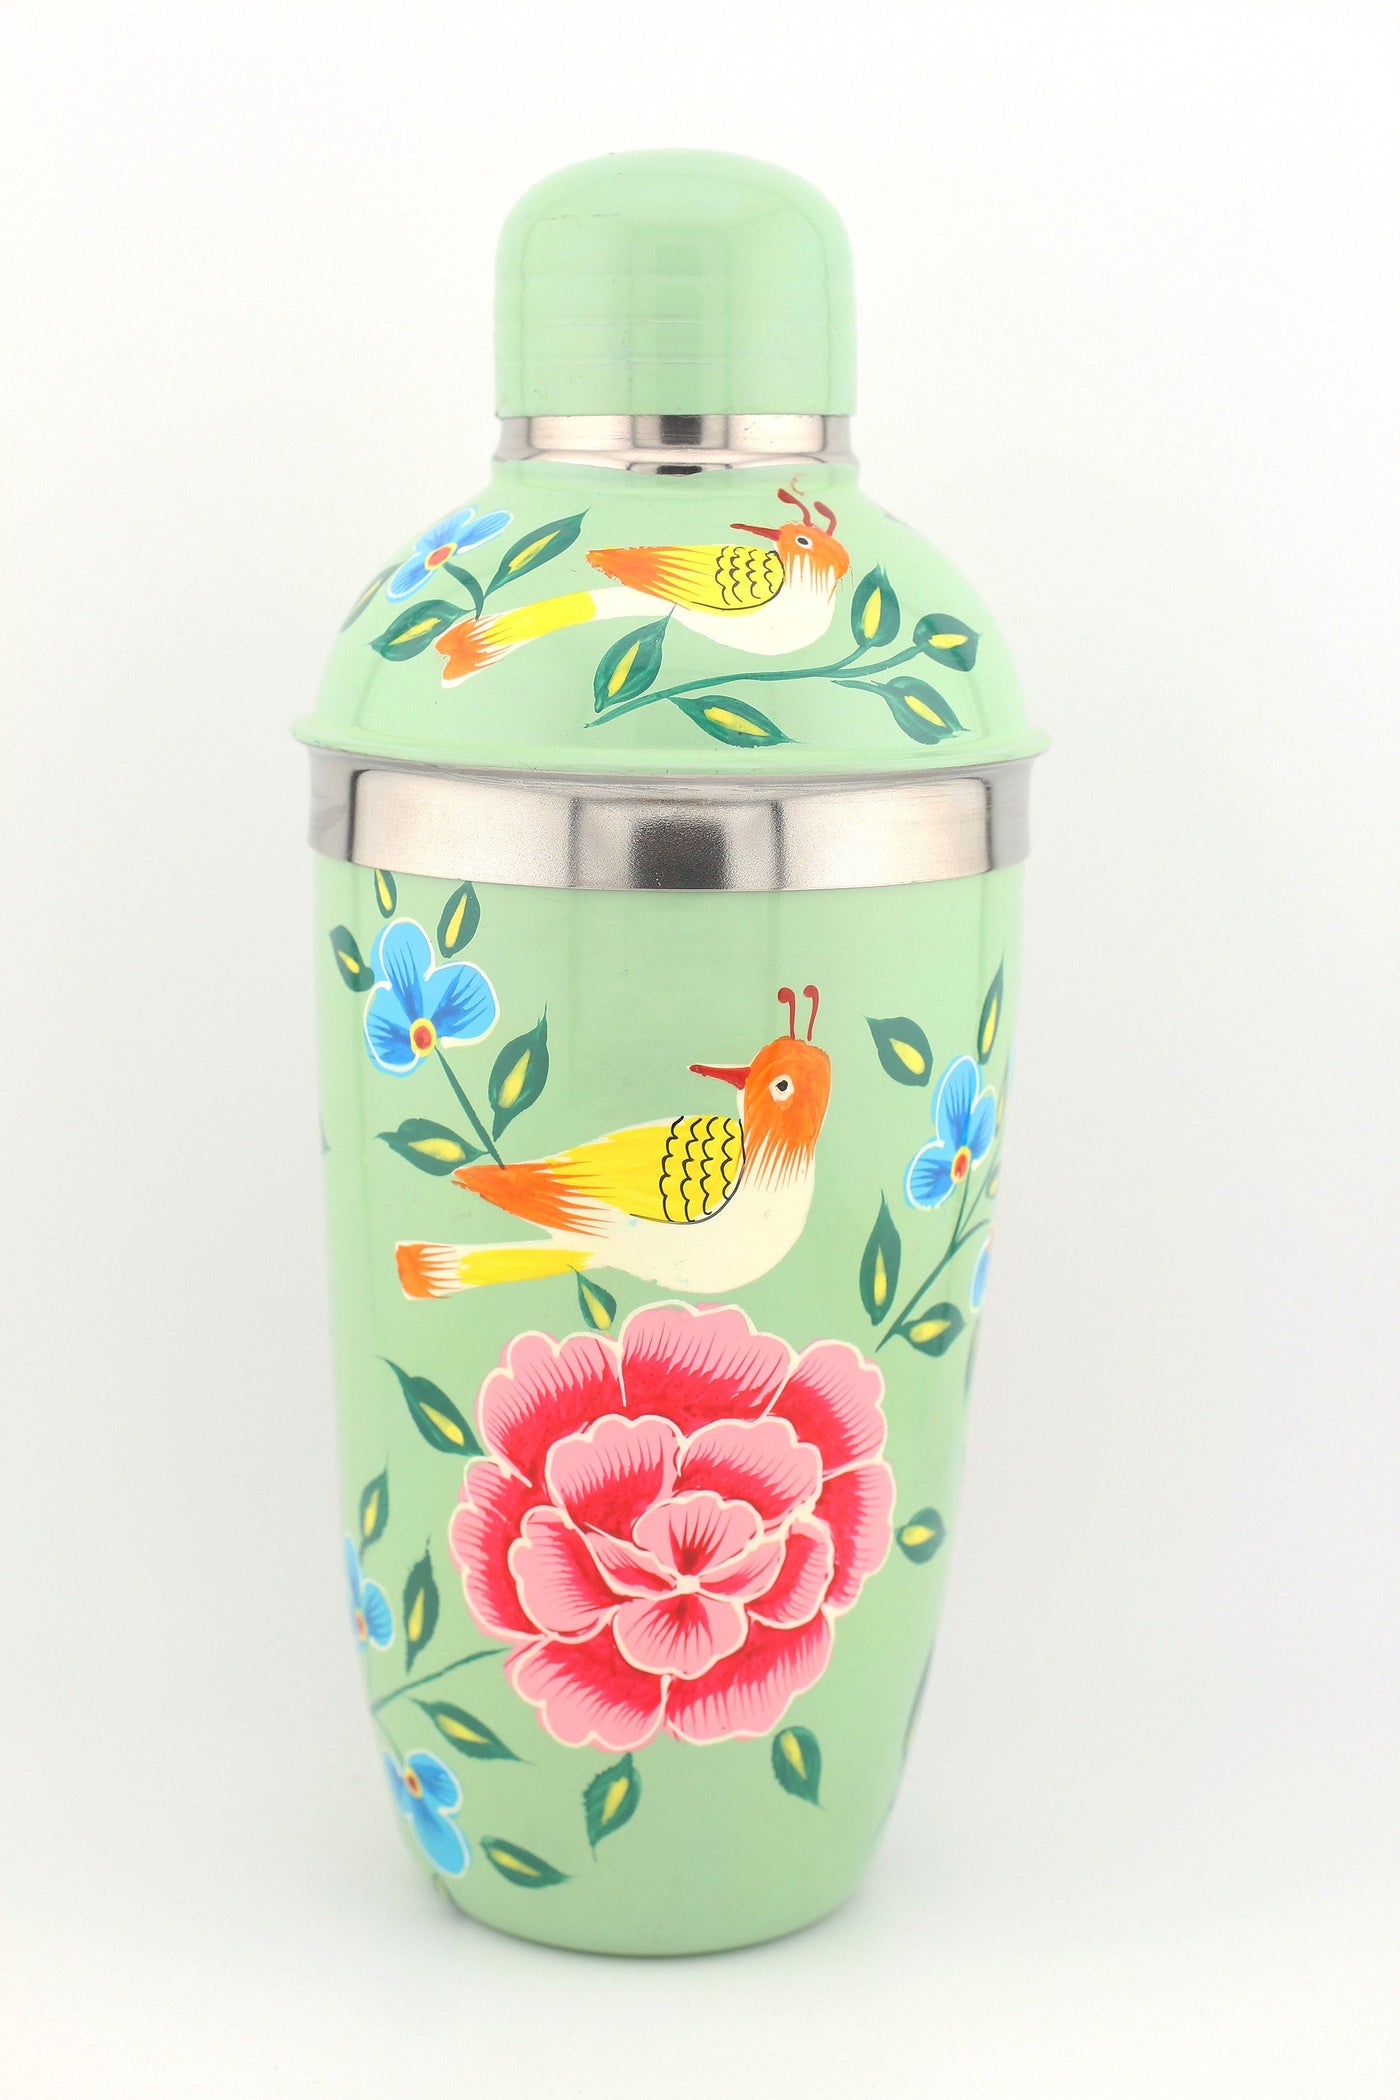 Floral Handpainted Stainless Steel Cocktail Shaker, from Kashmir